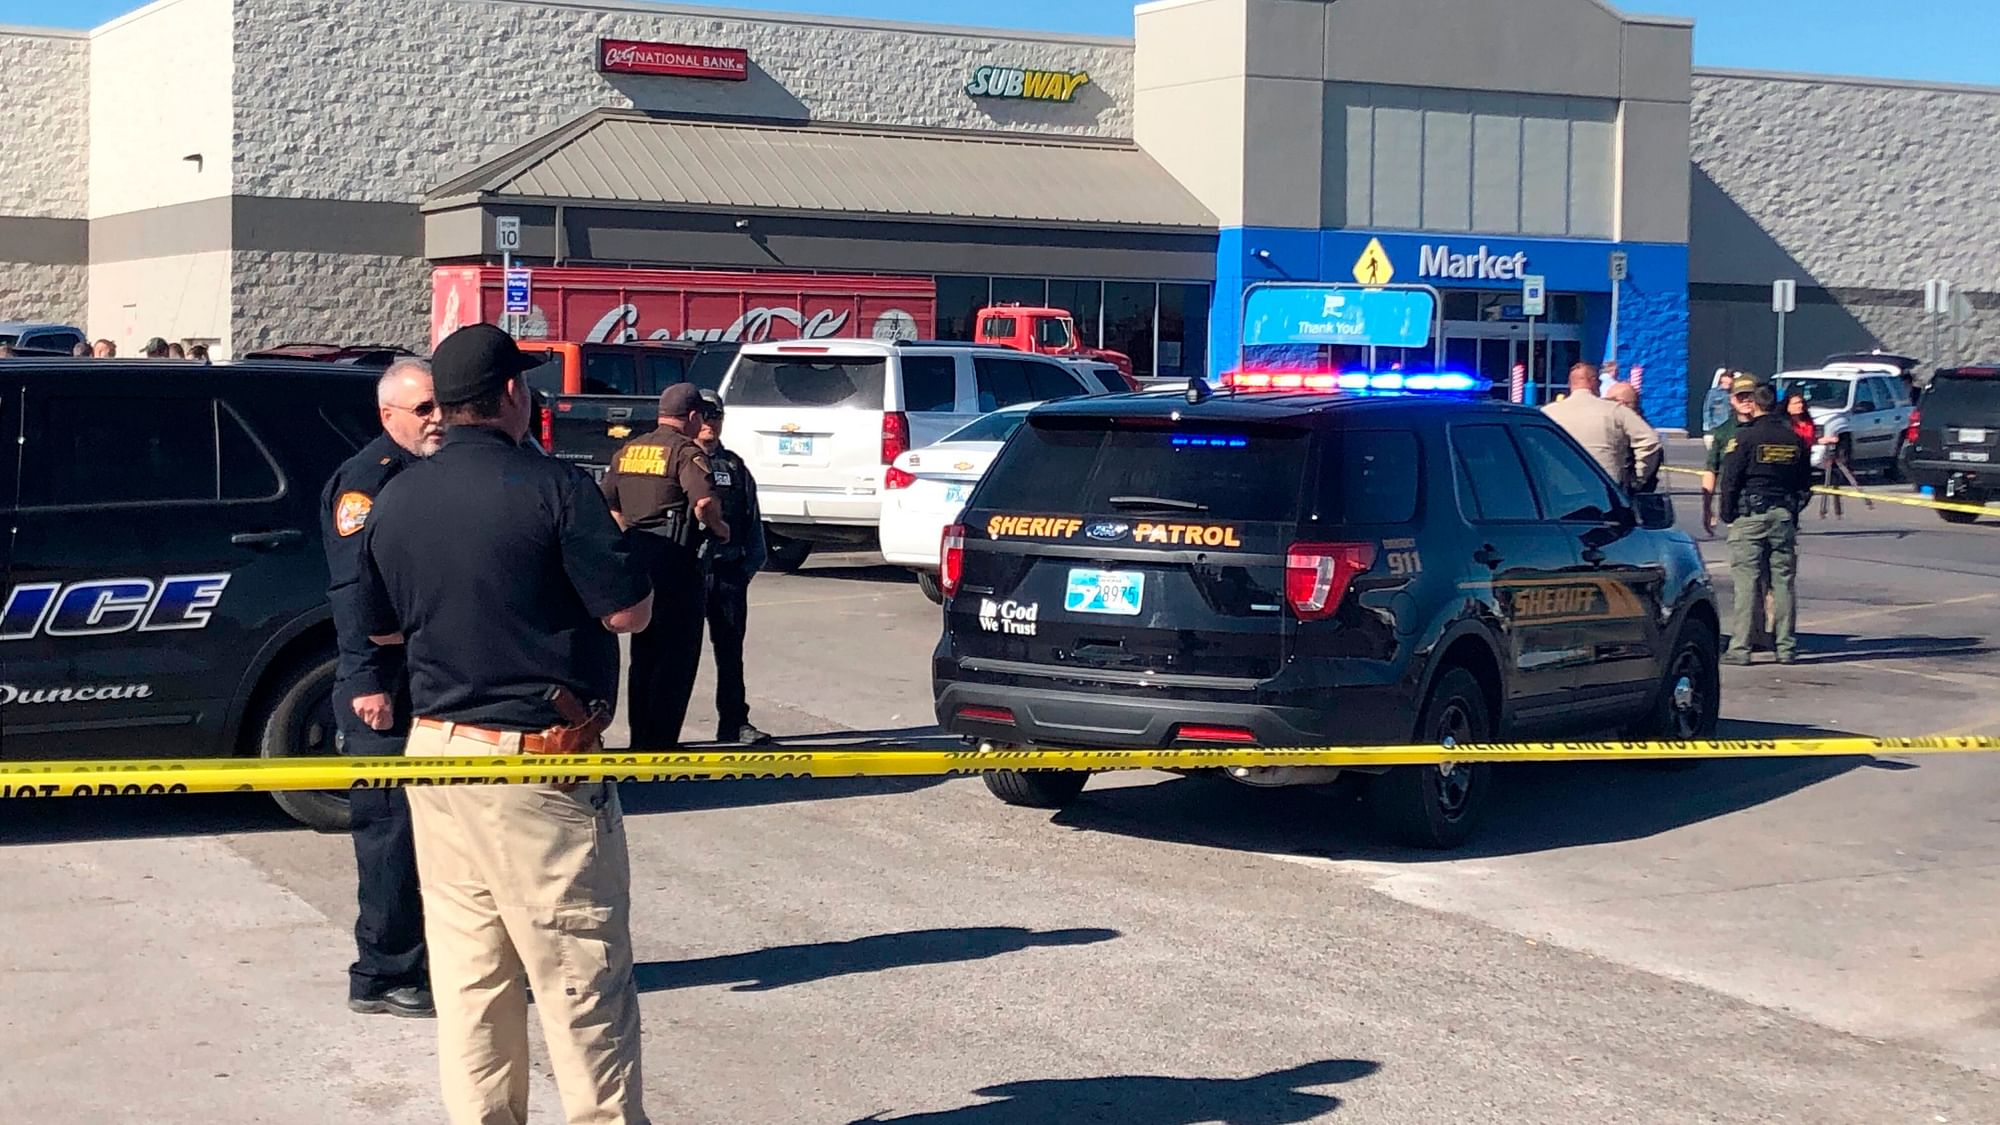 Law enforcement work the scene where two men and a woman were fatally shot Monday, Nov. 18, 2019, outside a Walmart store in Duncan, Okla.